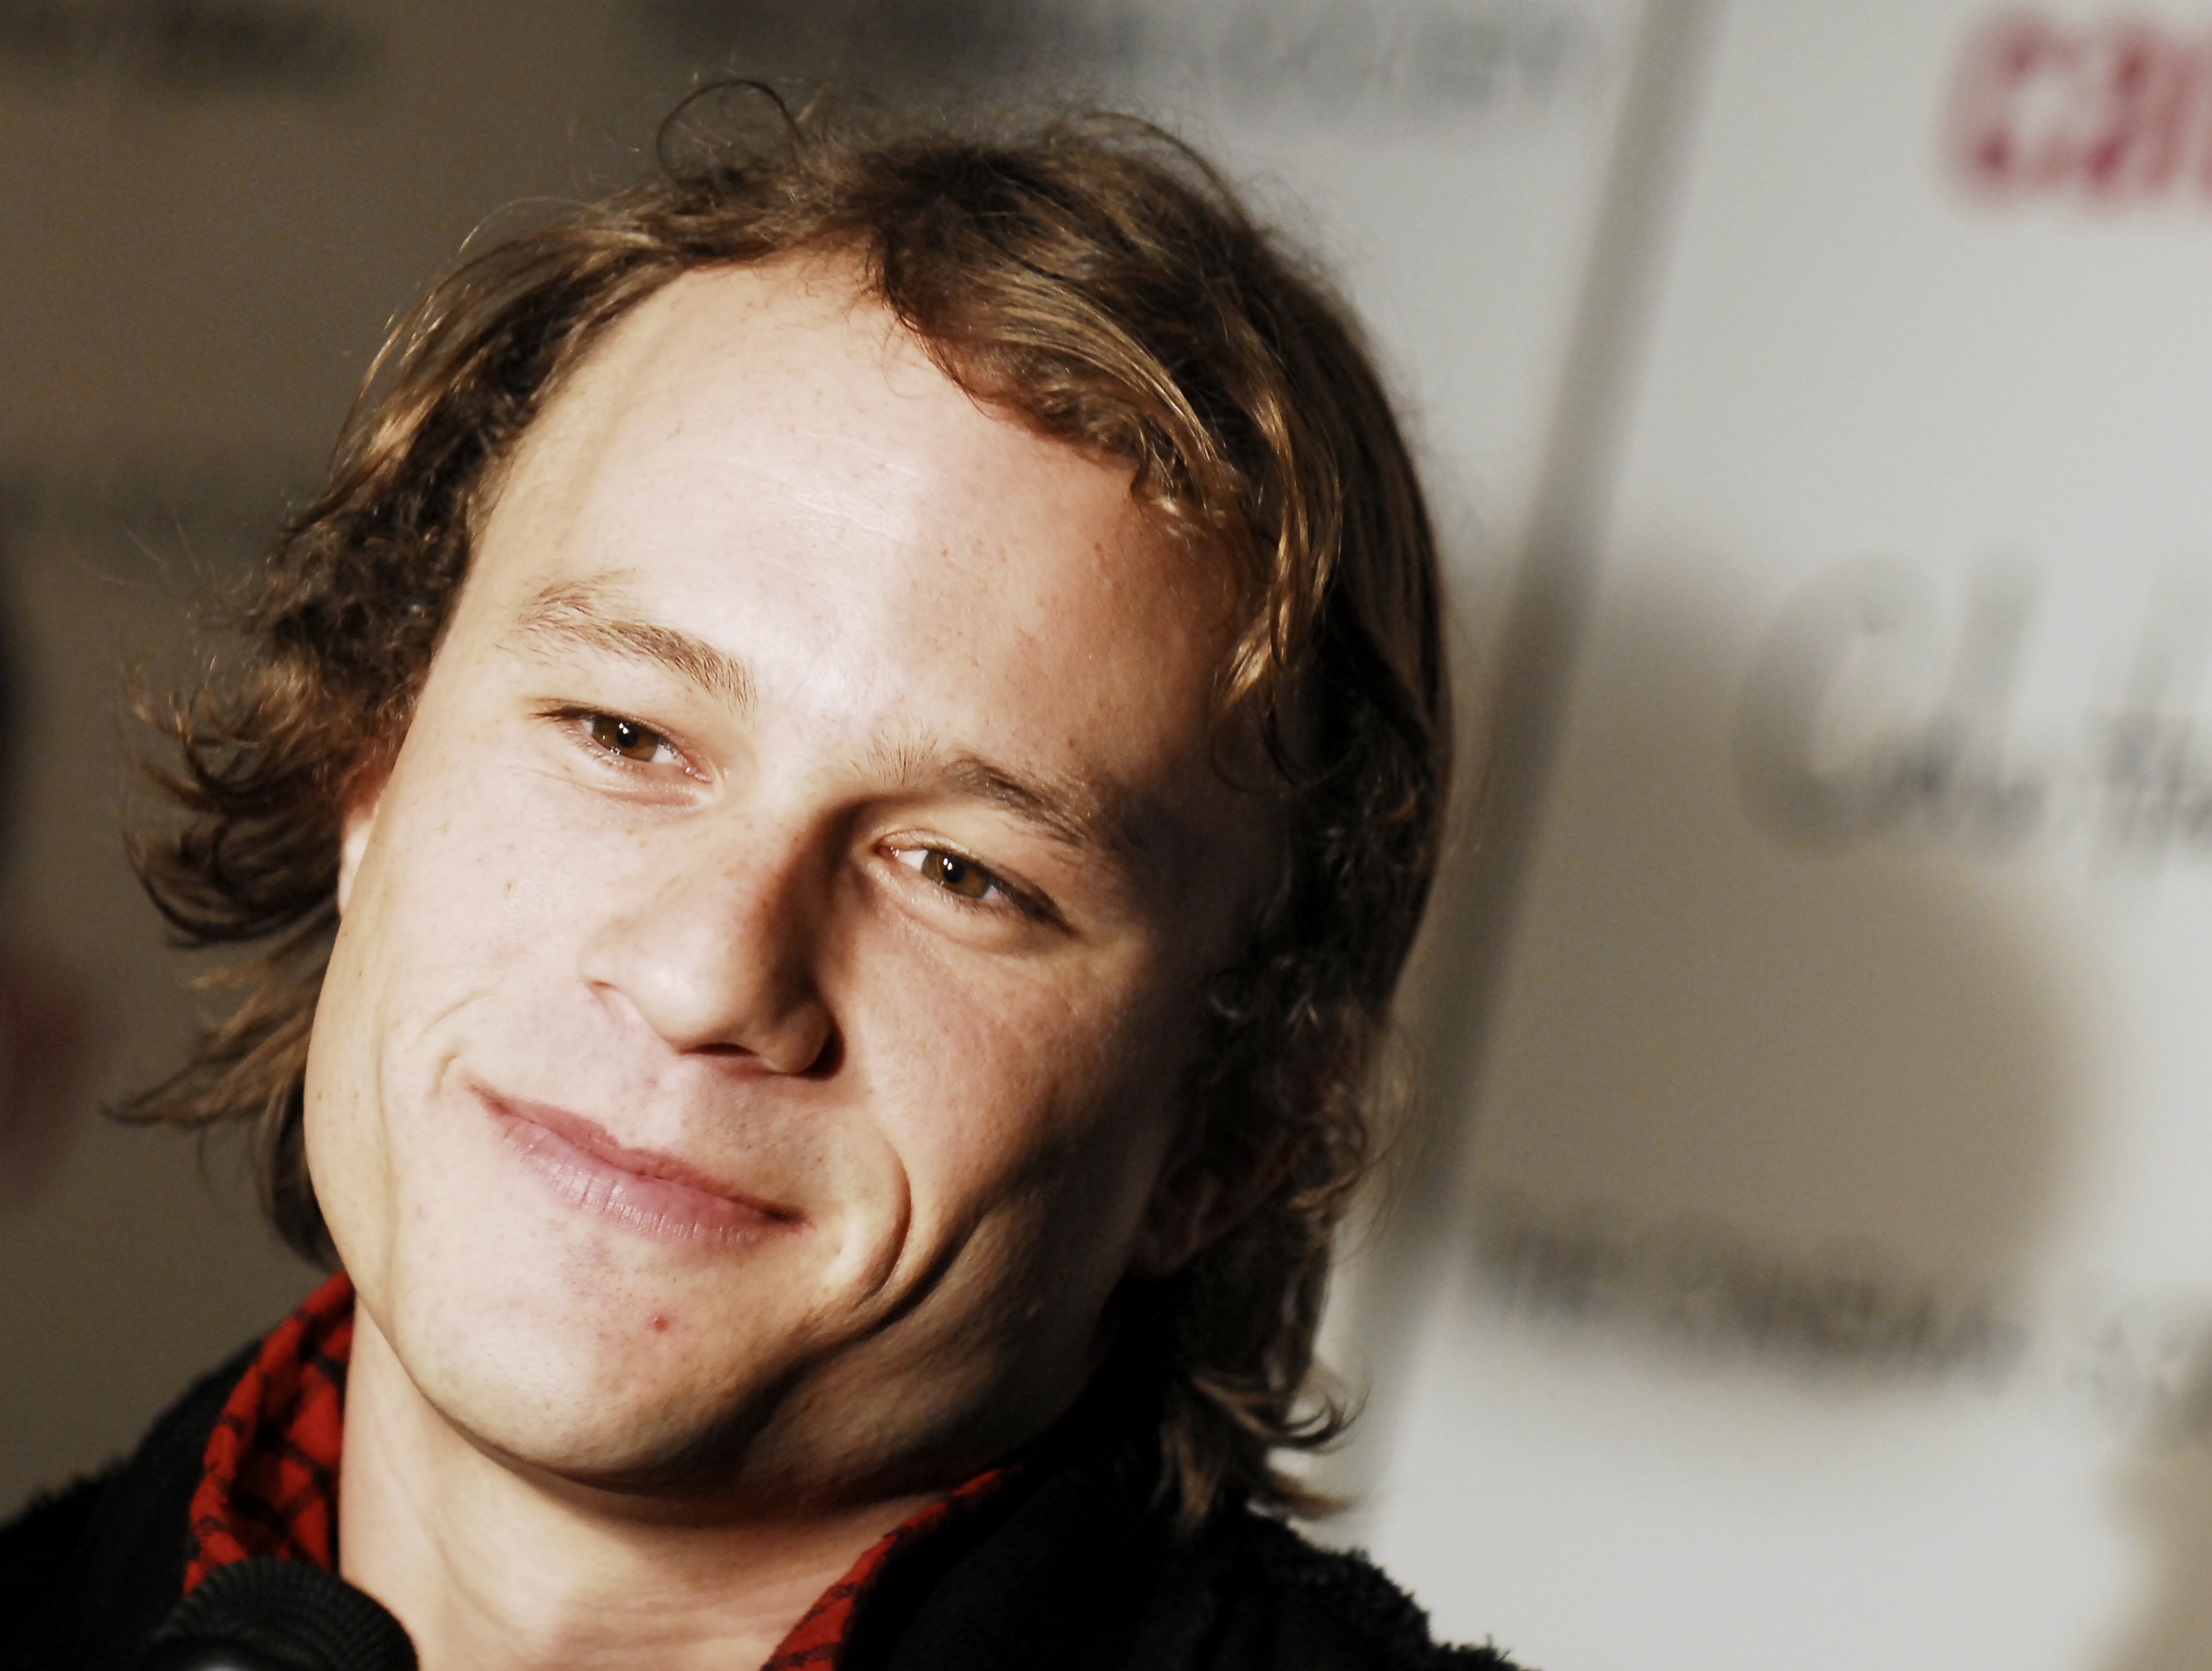 Heath Ledger in New York in 2006. | Source: Getty images